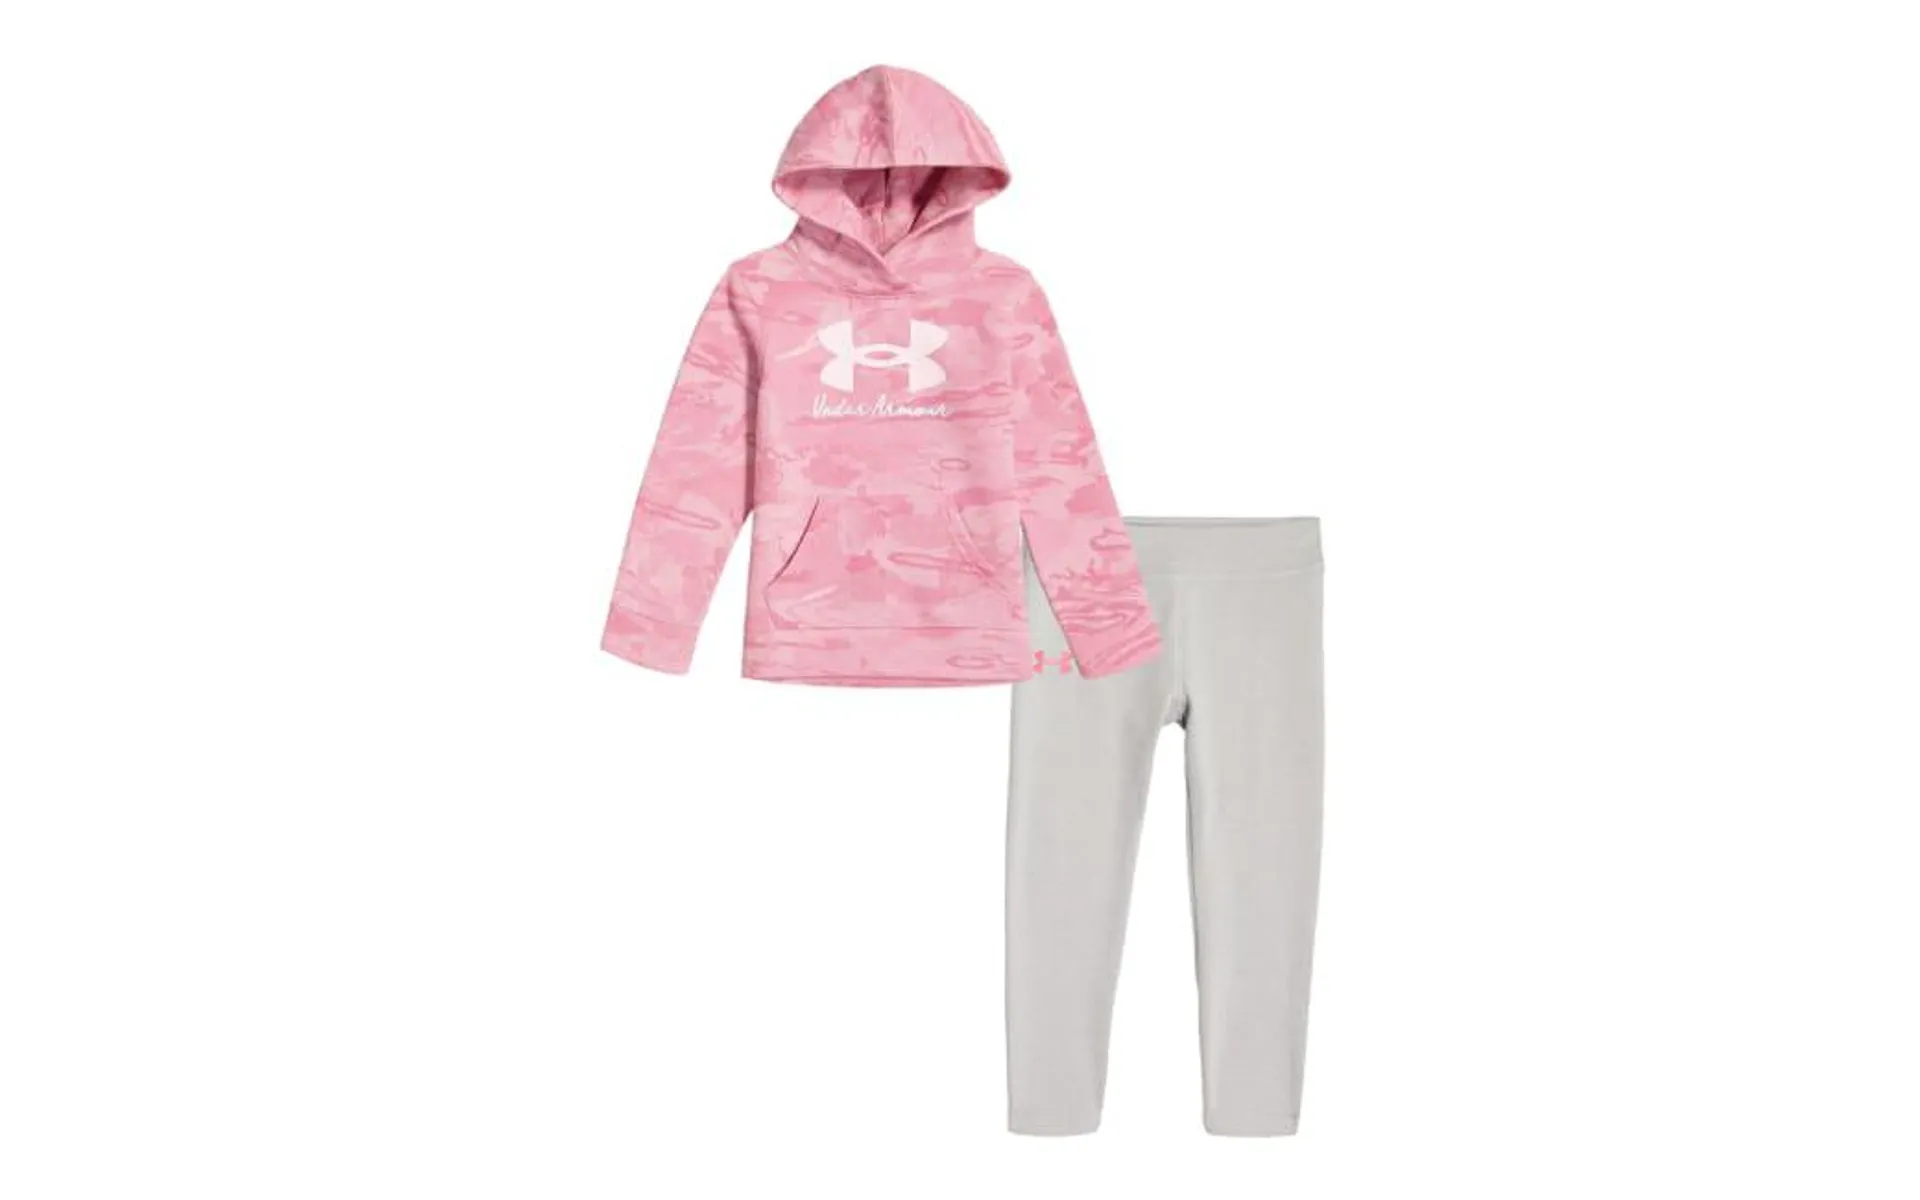 Under Armour Halftone Reaper Signature Logo Long-Sleeve Hoodie and Leggings Set for Babies, Toddlers, or Kids